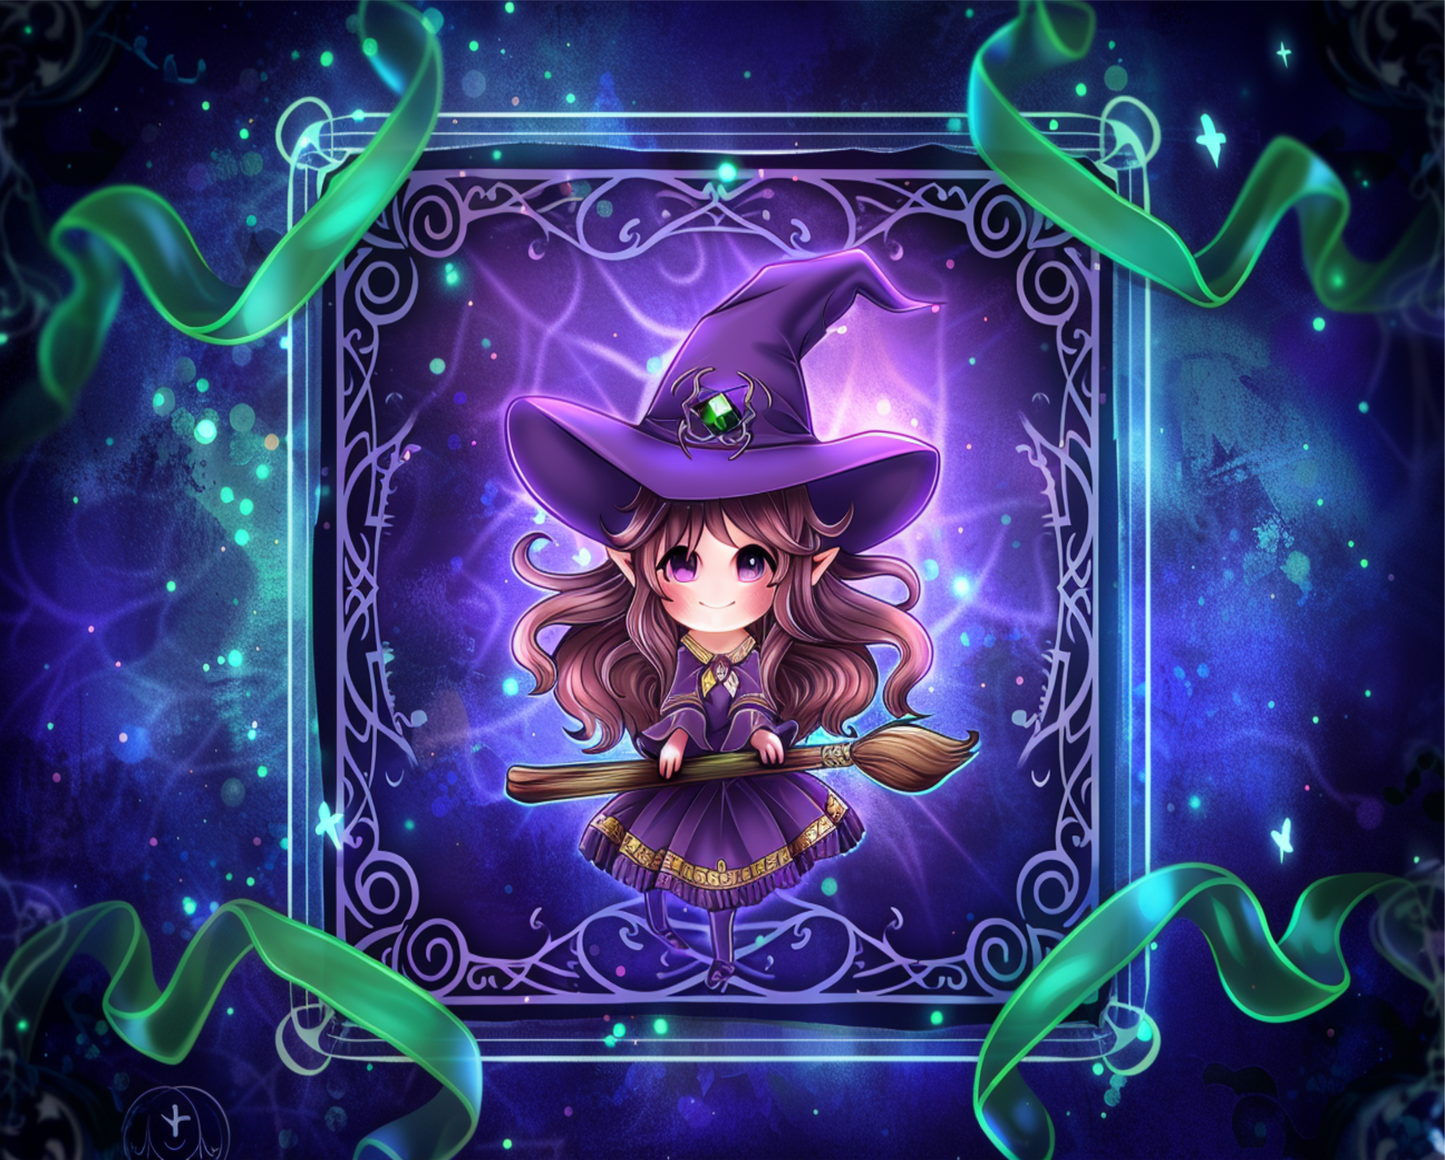 Purple witch in blue and green frame 8x10